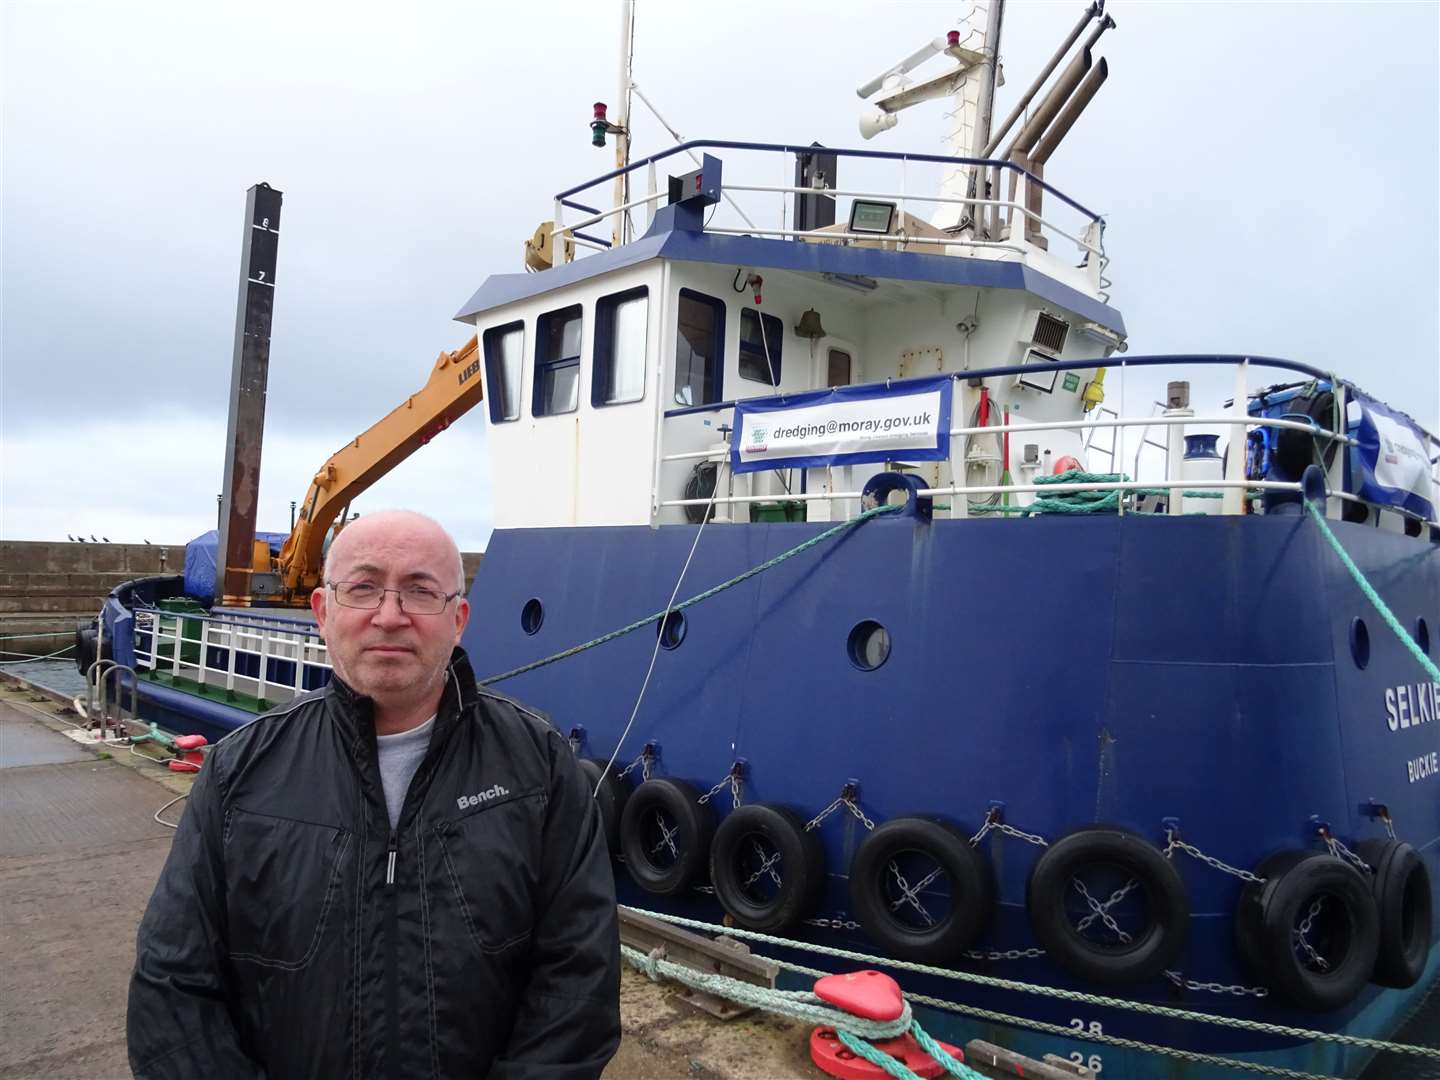 Councillor Marc Macrae stands alongside the controversy-dogged dredger MV Selkie.